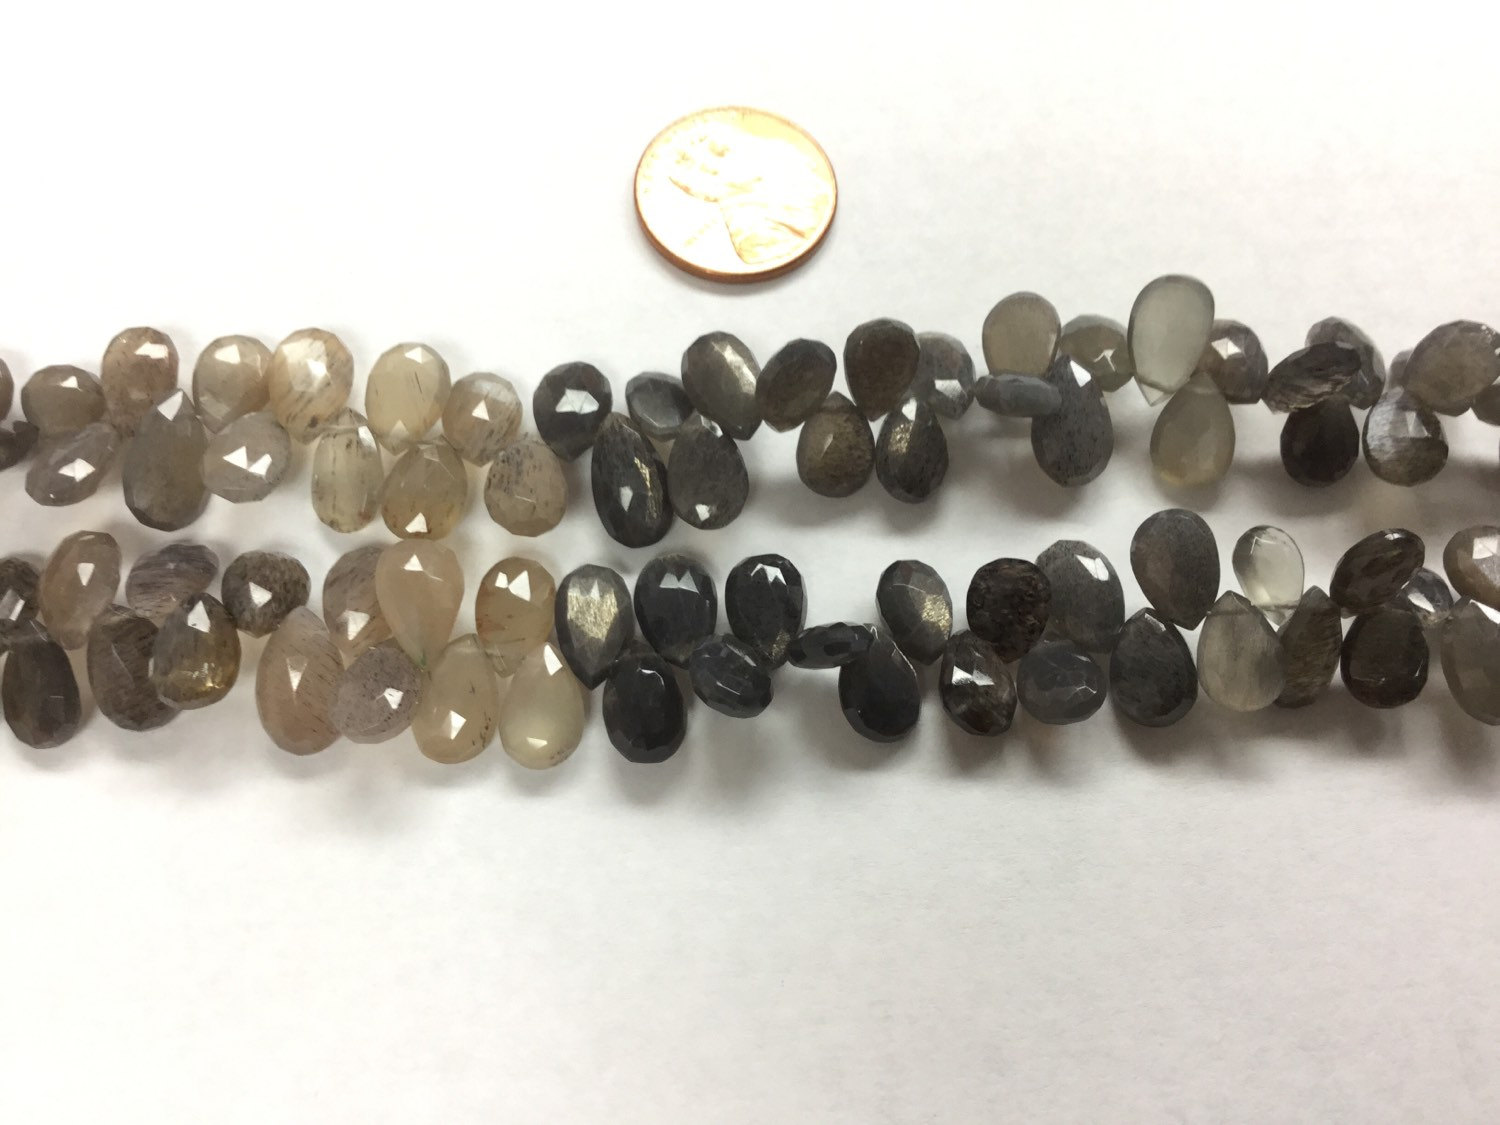 Moss Light Grey/Brown Moonstone Pears Faceted